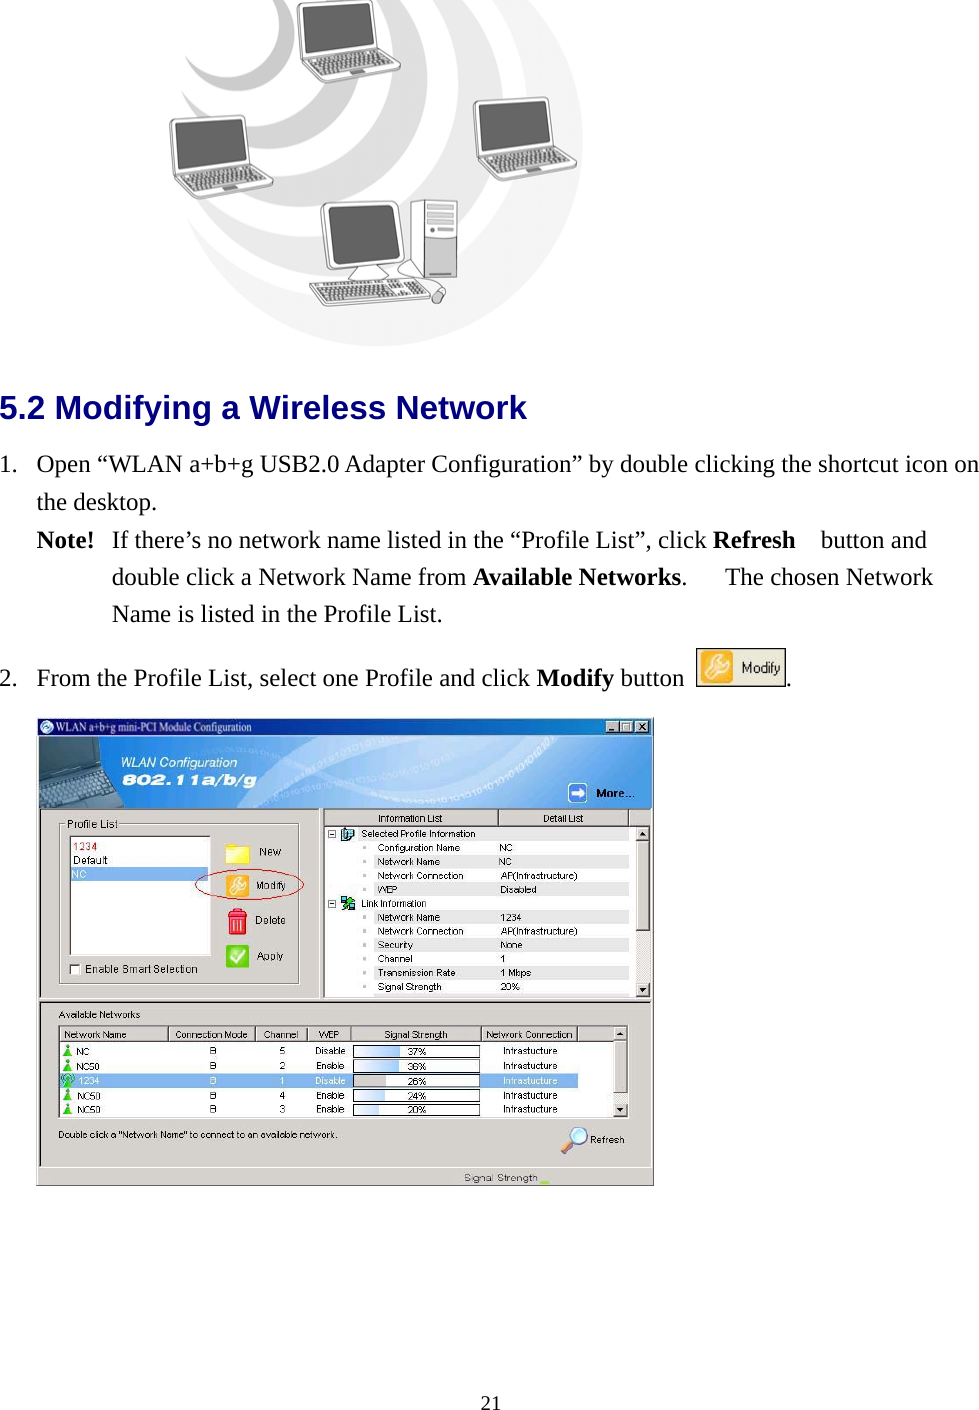  21 5.2 Modifying a Wireless Network   1.  Open “WLAN a+b+g USB2.0 Adapter Configuration” by double clicking the shortcut icon on the desktop.   Note!   If there’s no network name listed in the “Profile List”, click Refresh  button and double click a Network Name from Available Networks.   The chosen Network Name is listed in the Profile List. 2.  From the Profile List, select one Profile and click Modify button  .   